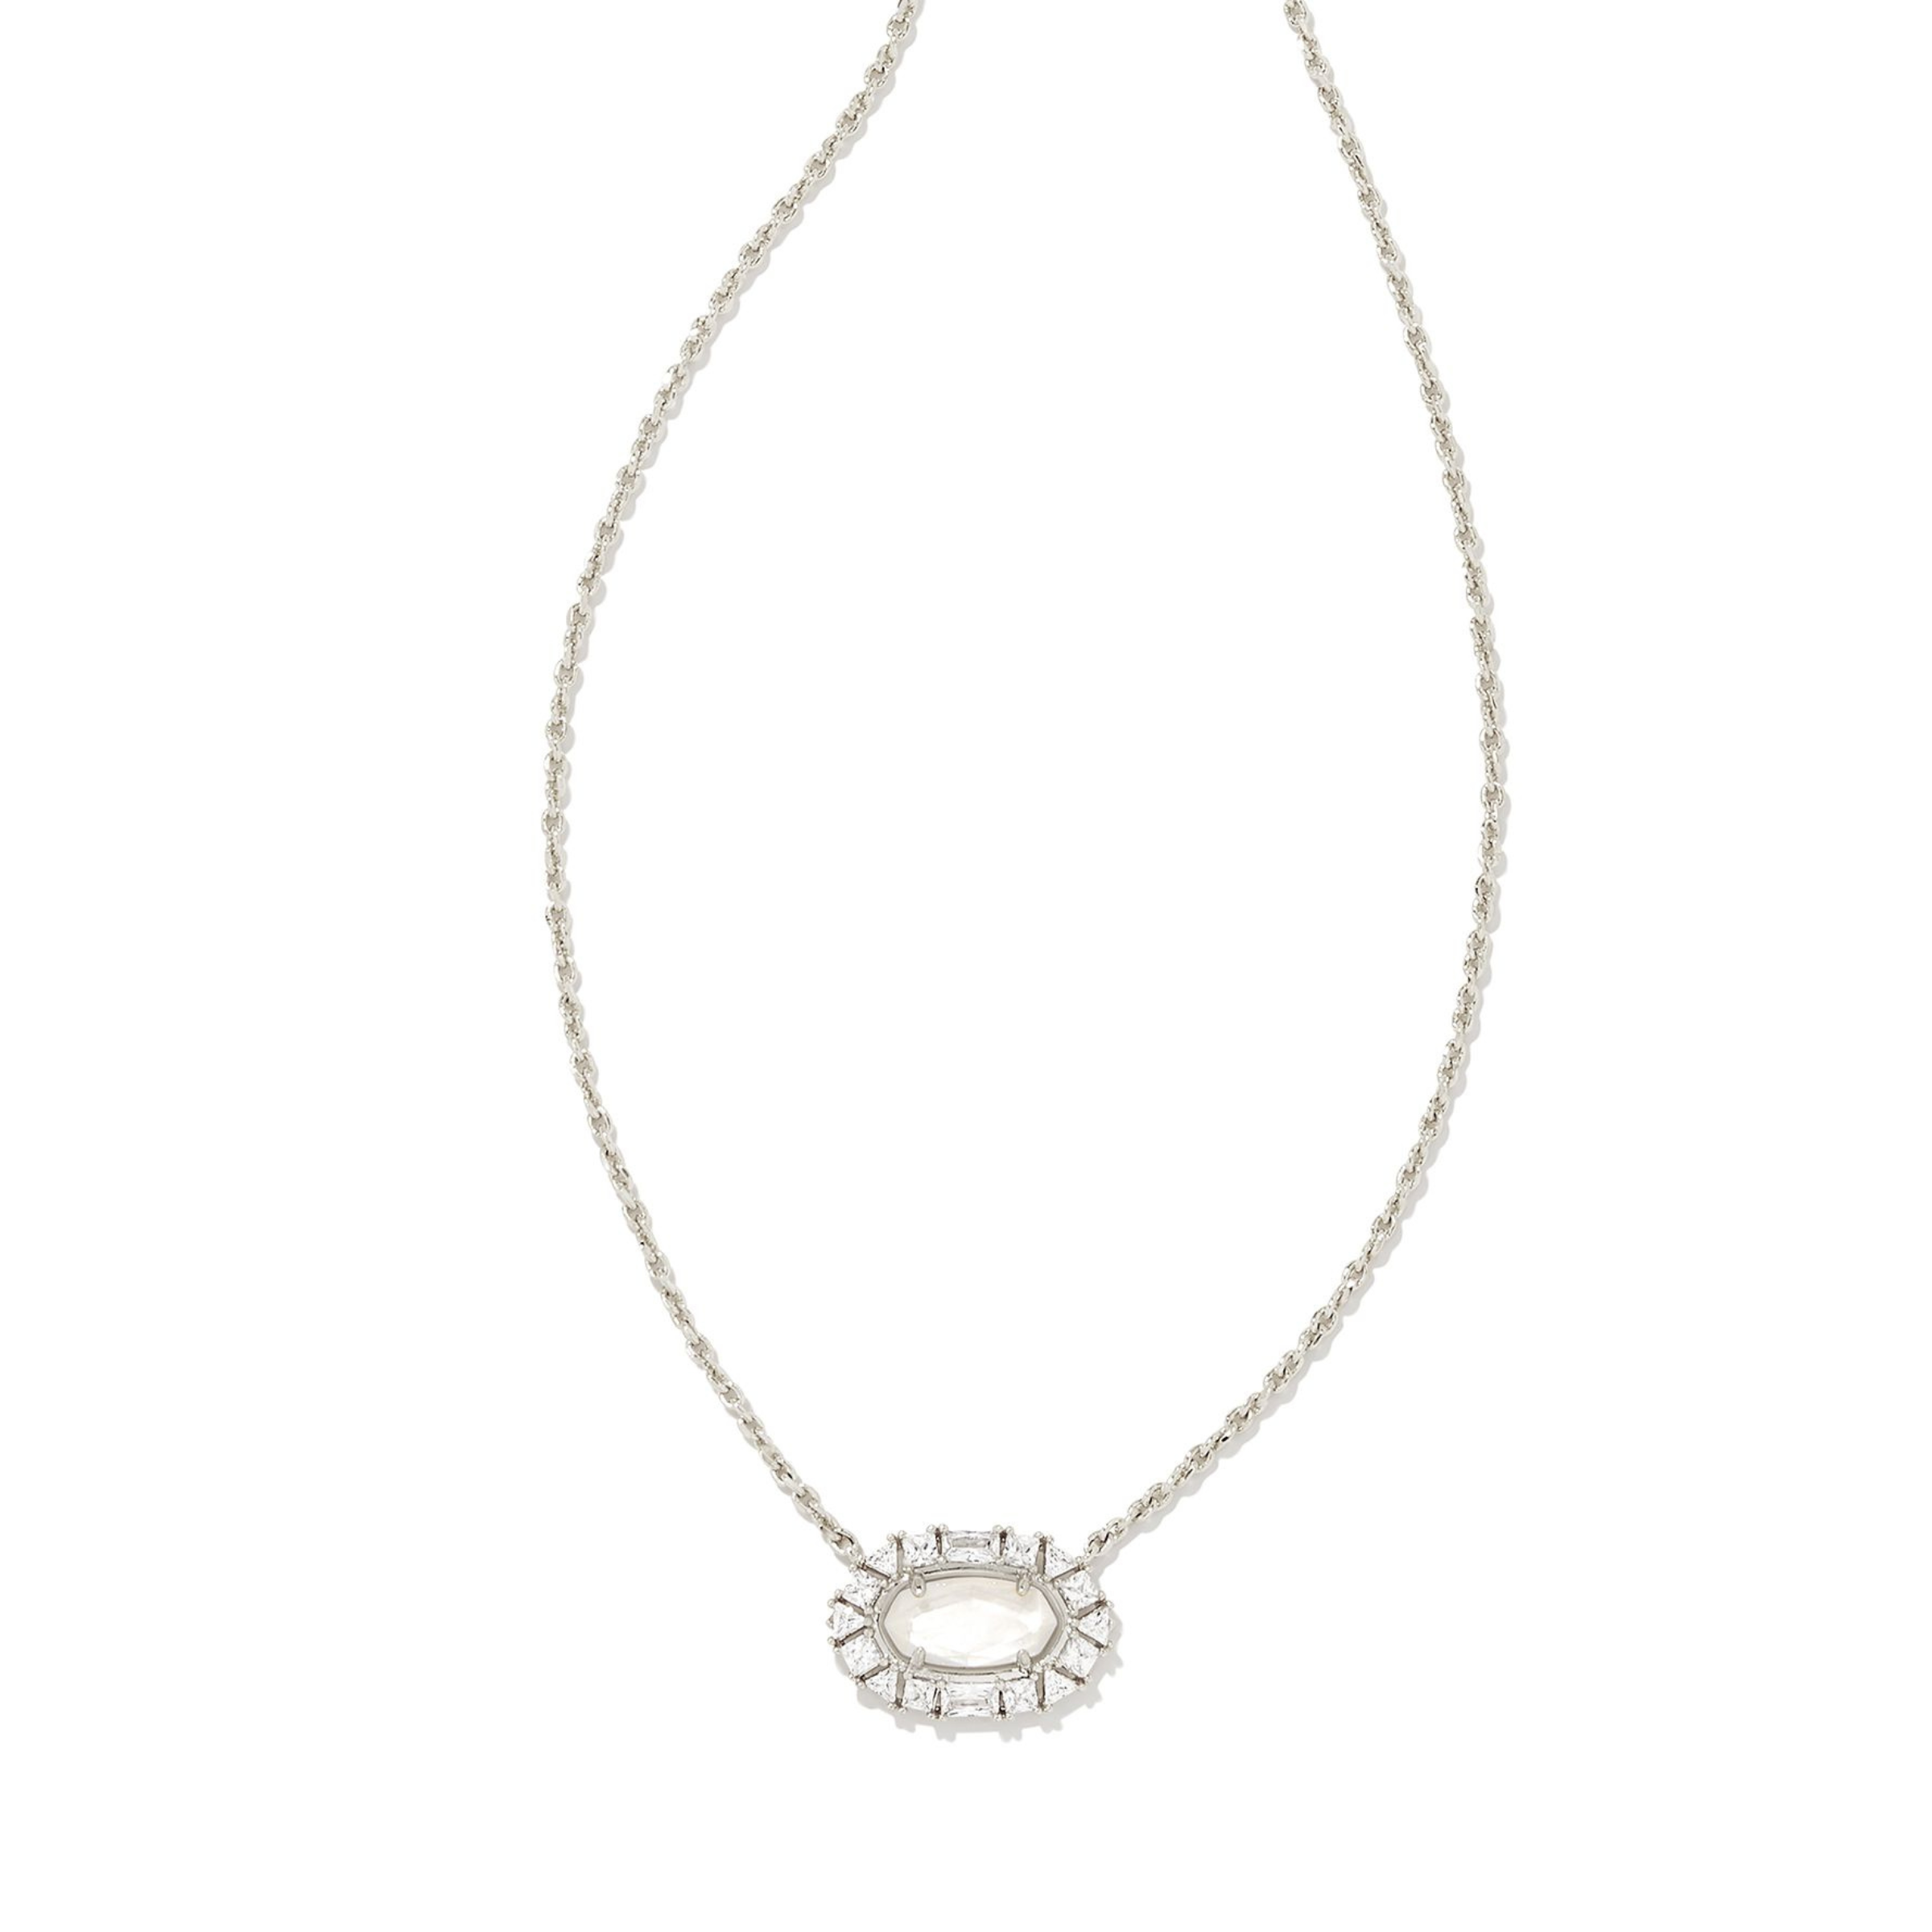 Silver chain necklace with a clear crystal and ivory mother of pearl oval pendant pictured on a white background. 